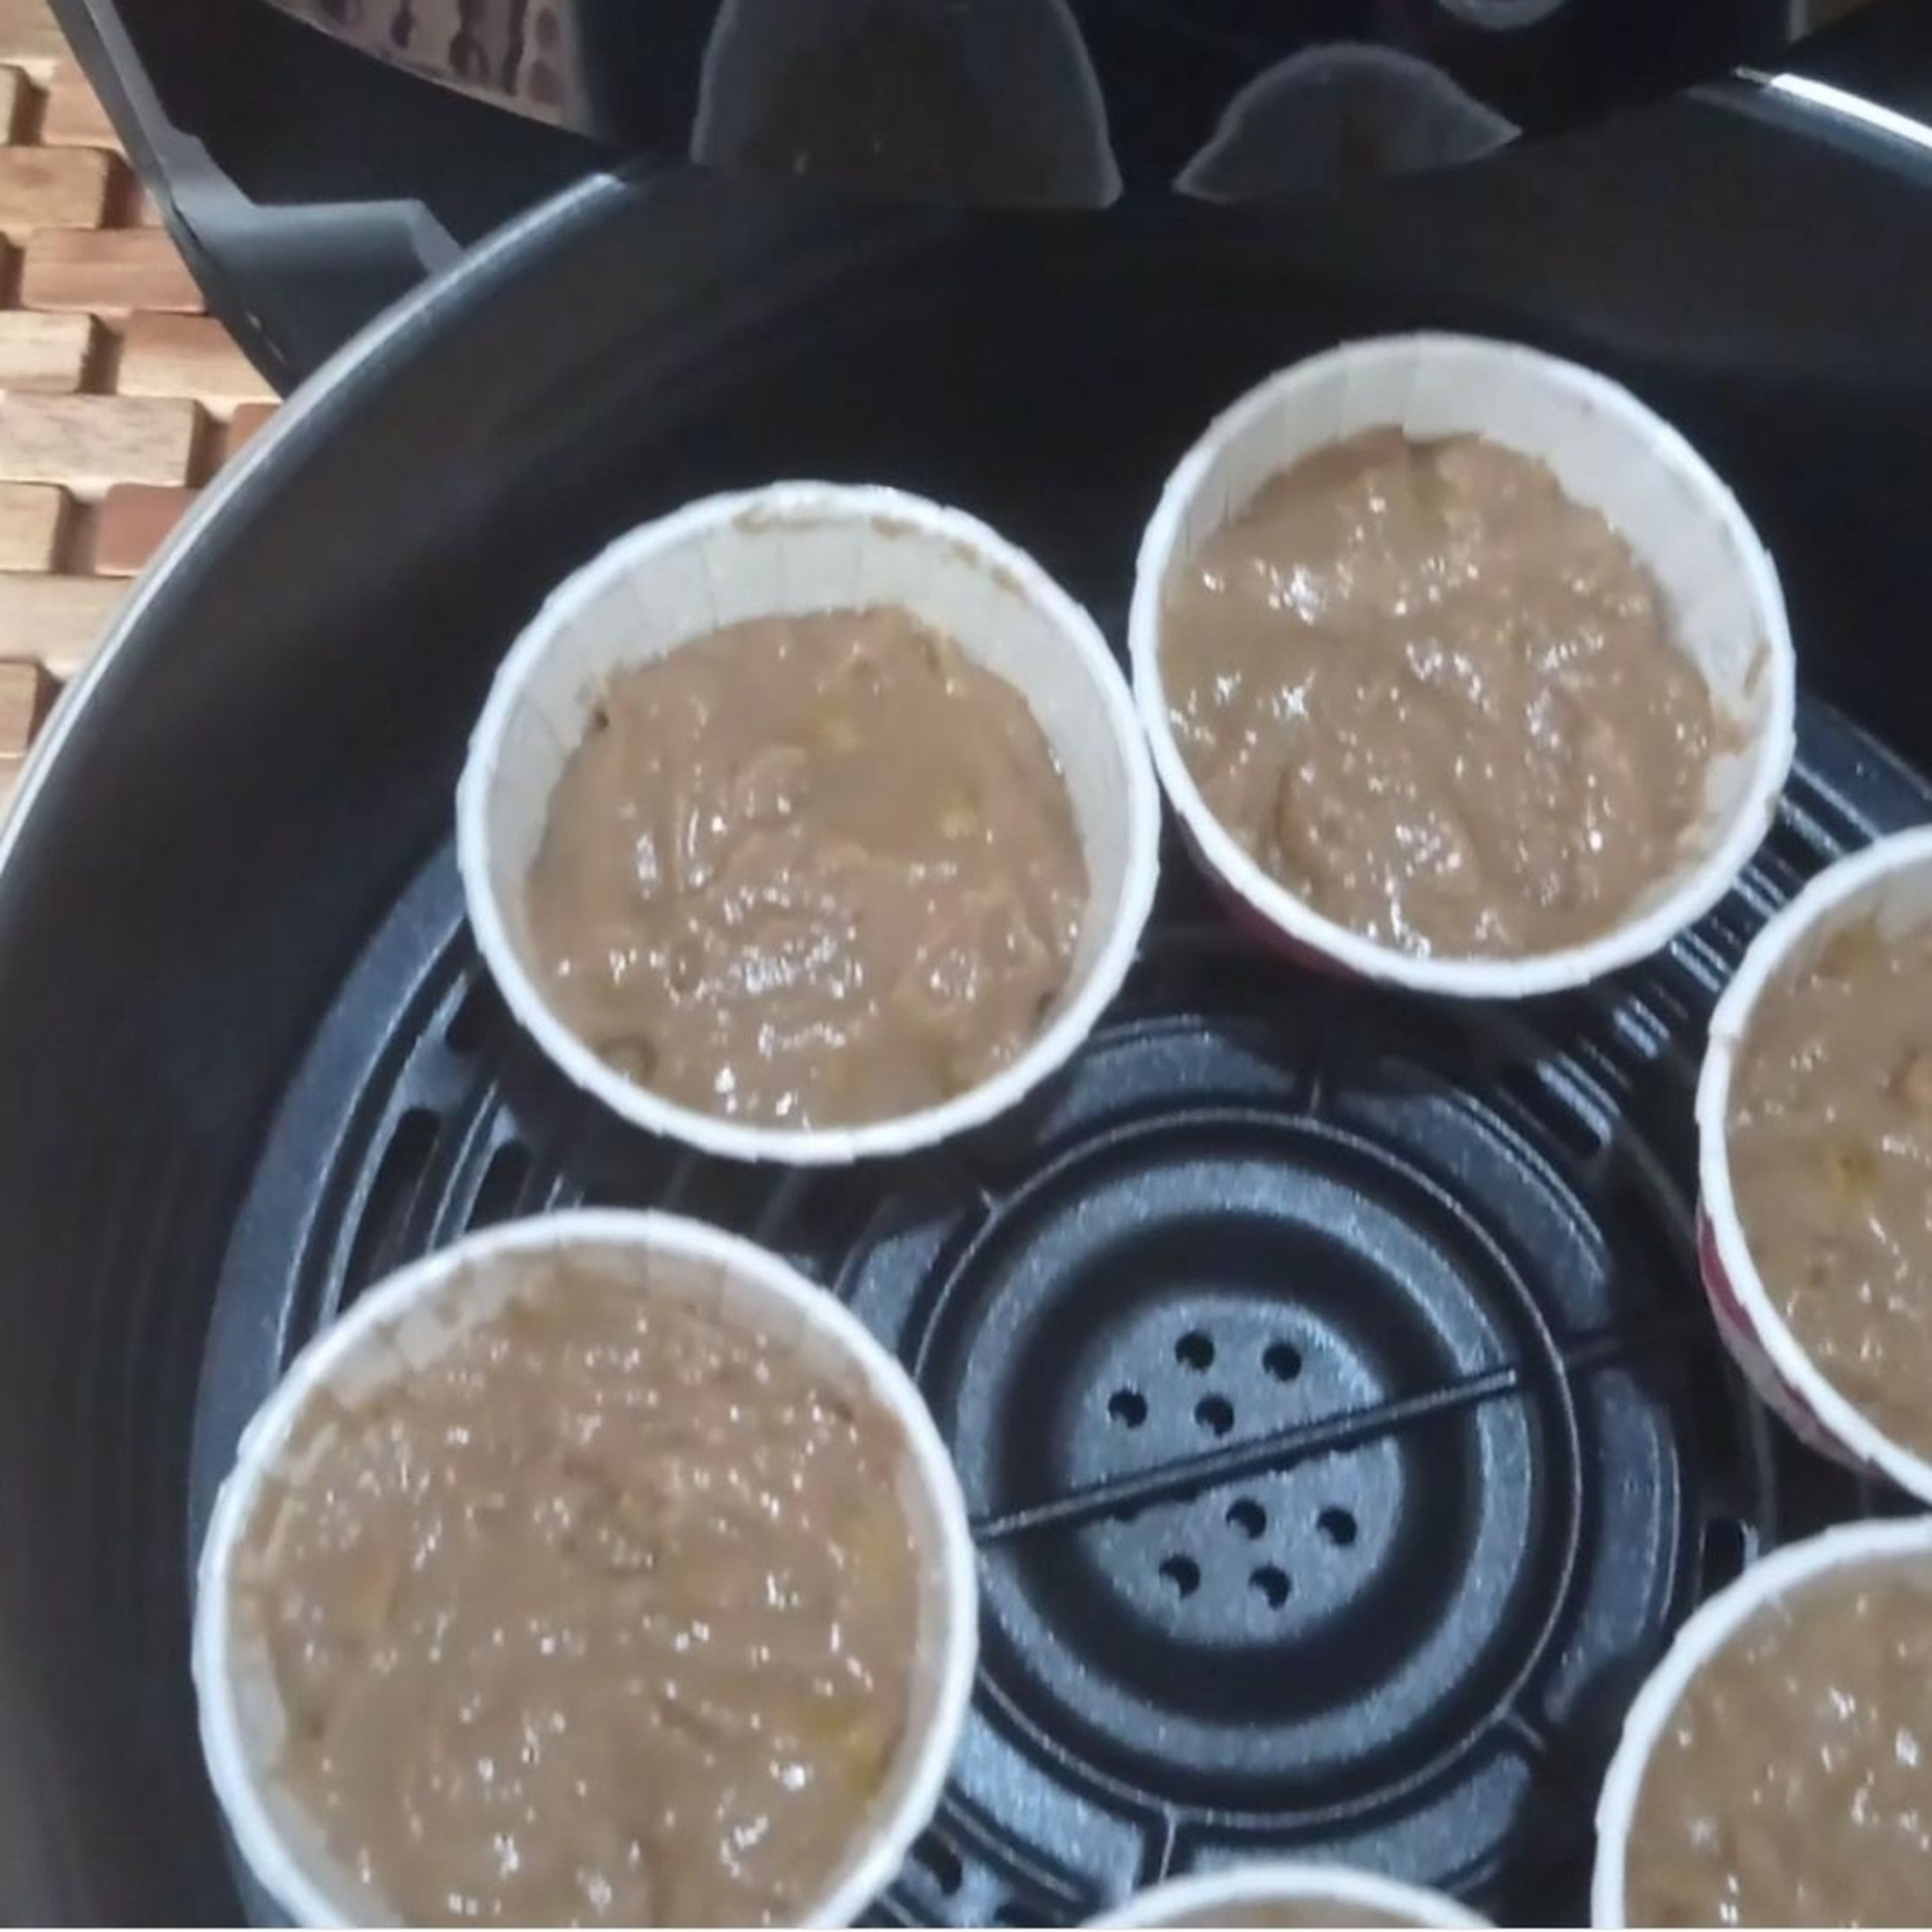 Pour the batter into the muffin cups. Transfer the muffin cups into the Air Fryer basket.